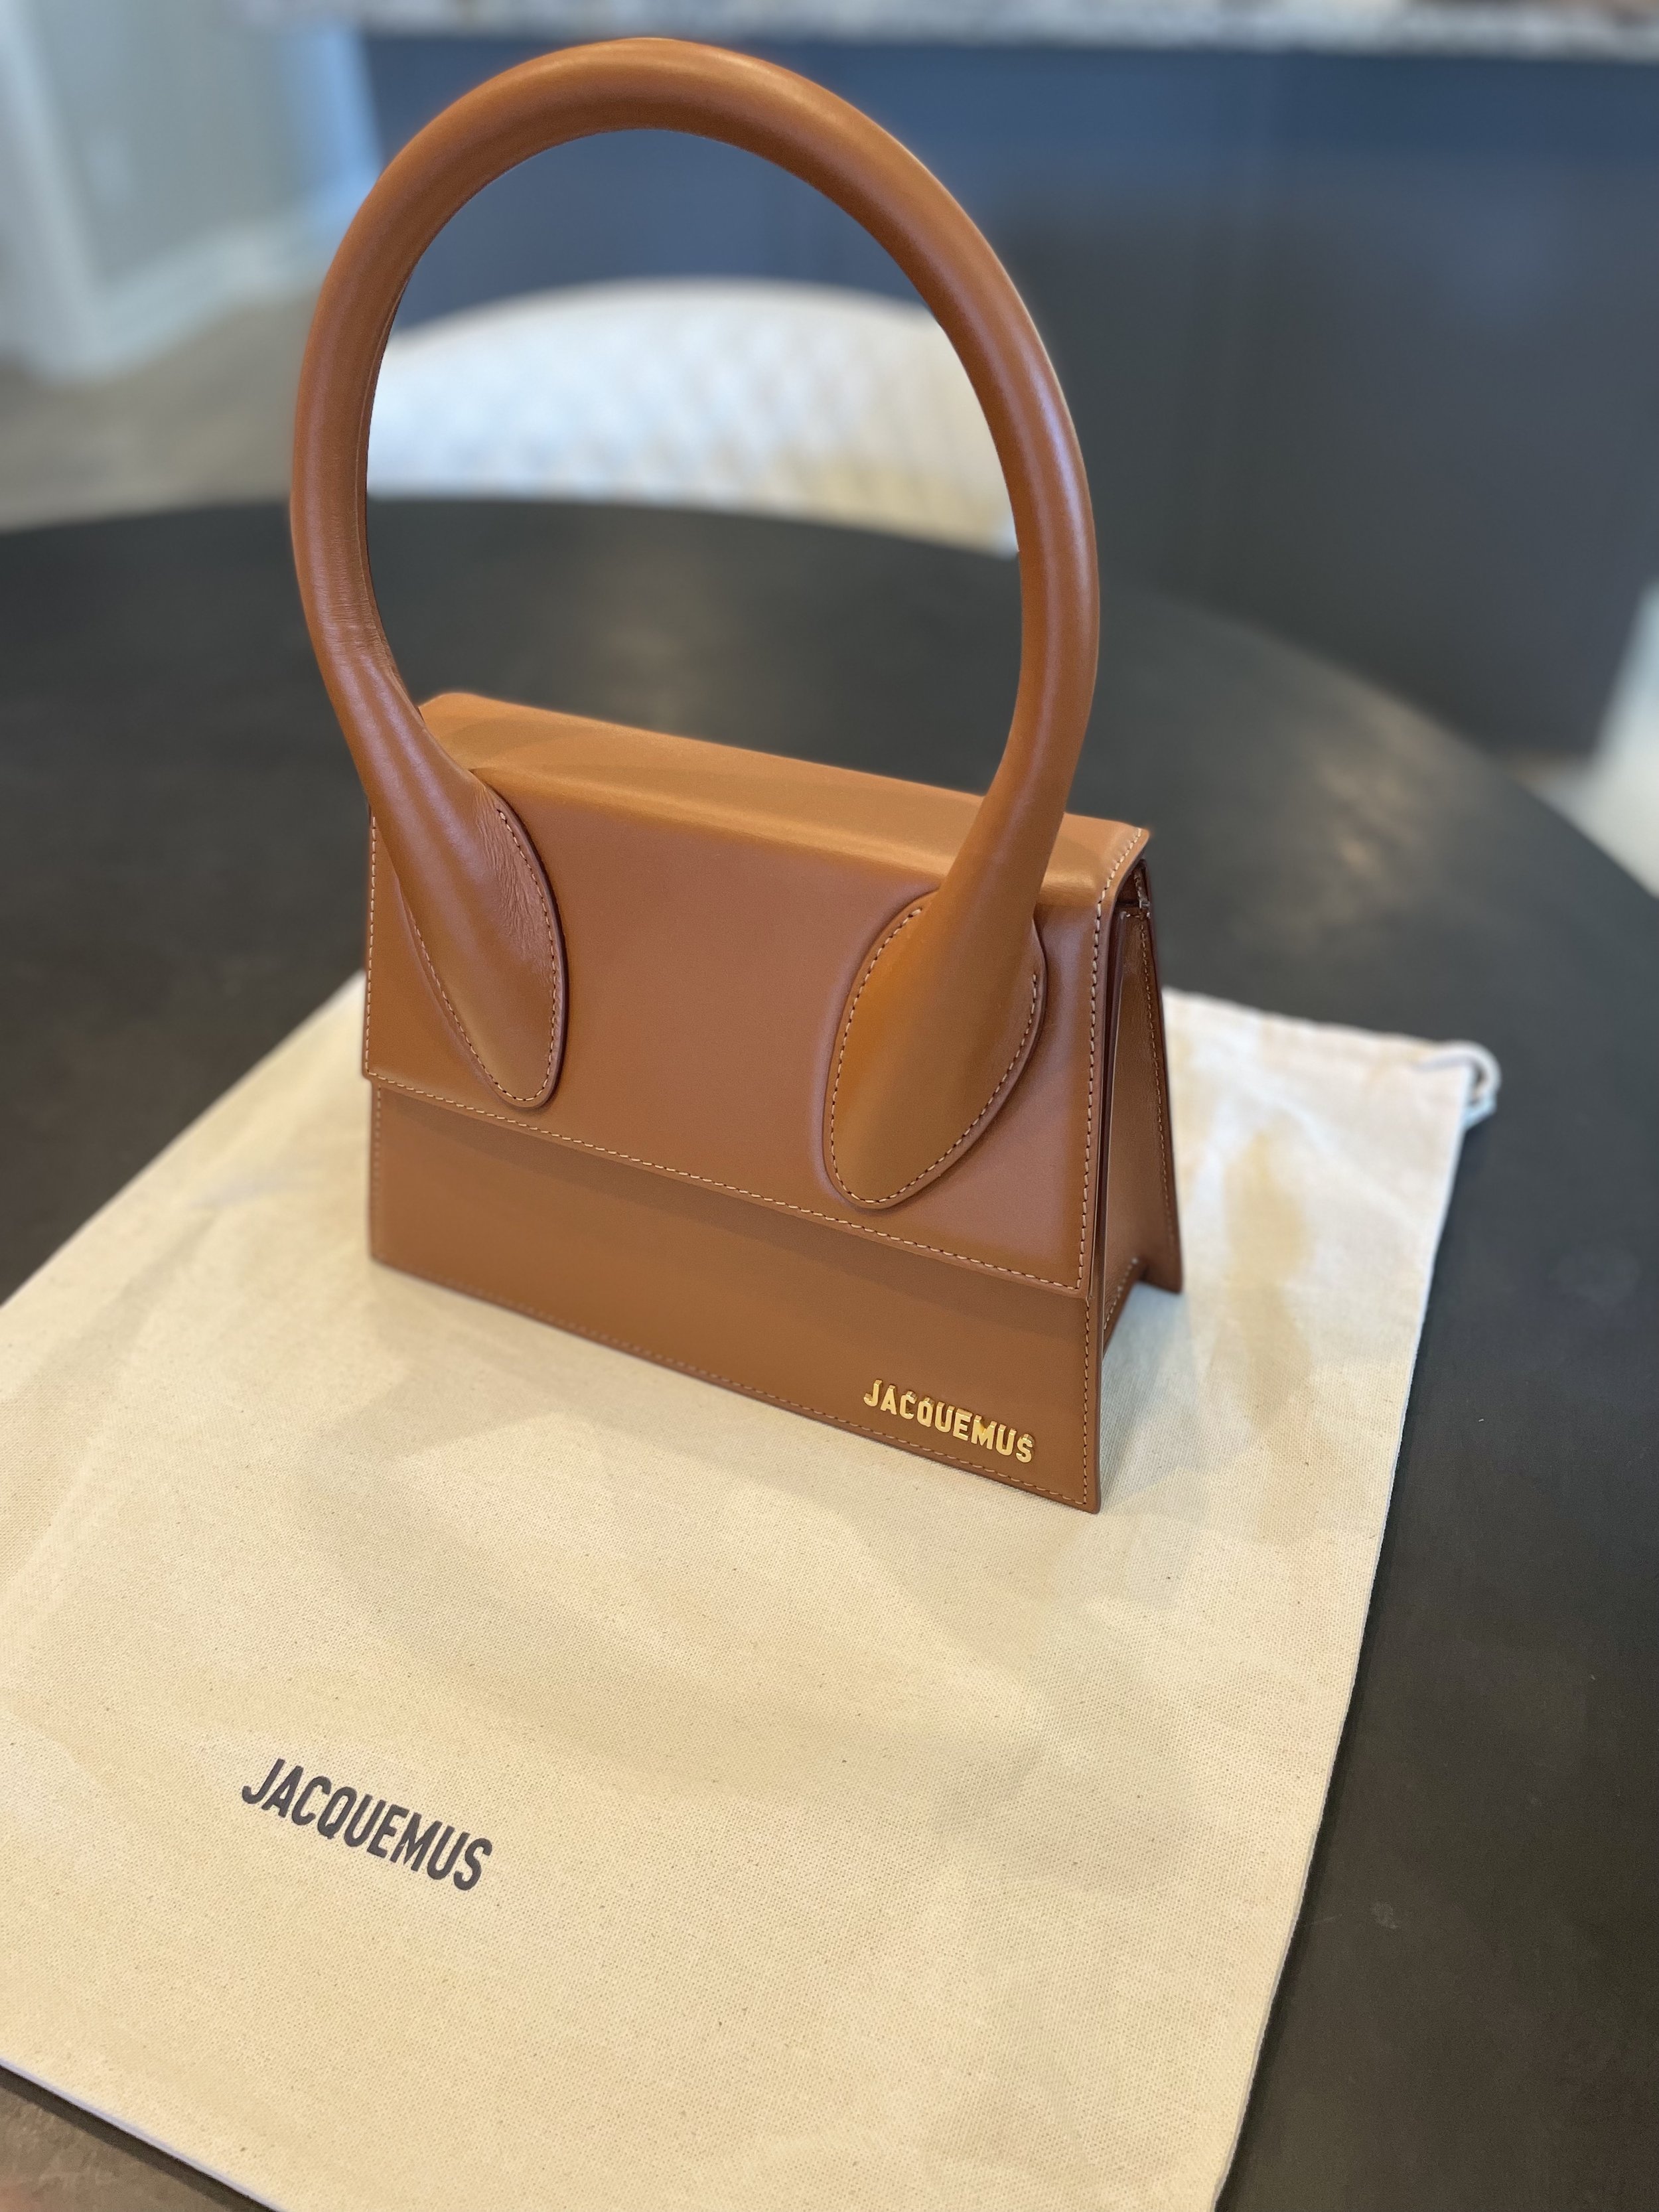 JACQUEMUS BAGS REVIEW: WEAR & TEAR and WHAT FITS - Le Grand